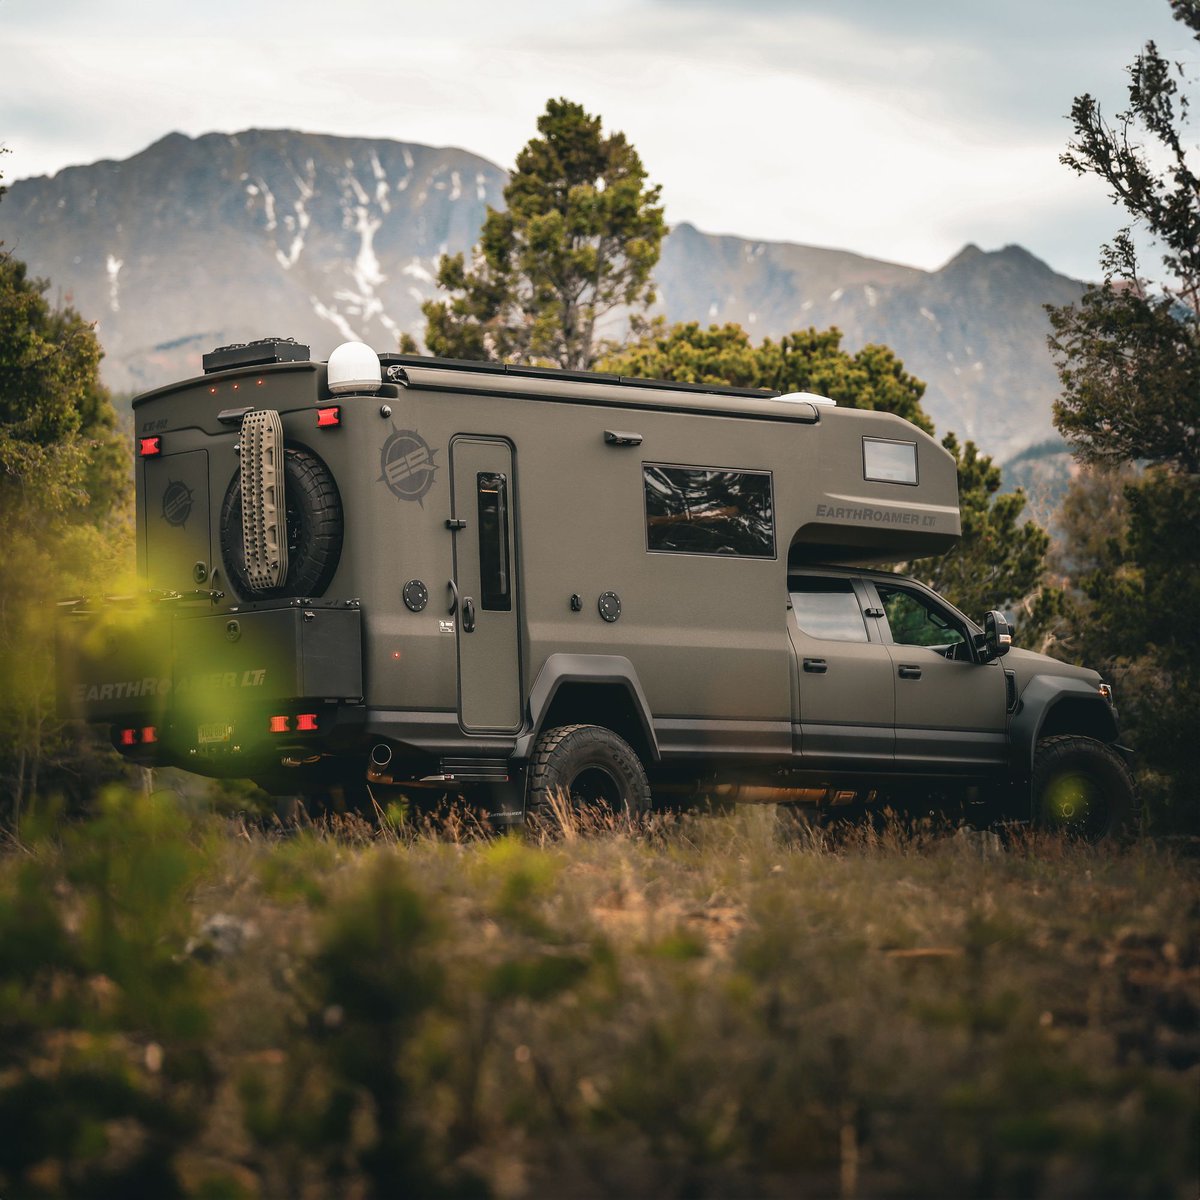 Out in the wilderness is where we want to be 🌲
·
·
·

#earthroamer  #offroad4x4 #expeditionvehicle #campinglife #overlanding #4x4life #4x4trucks #vanlife #vanlifeadventures